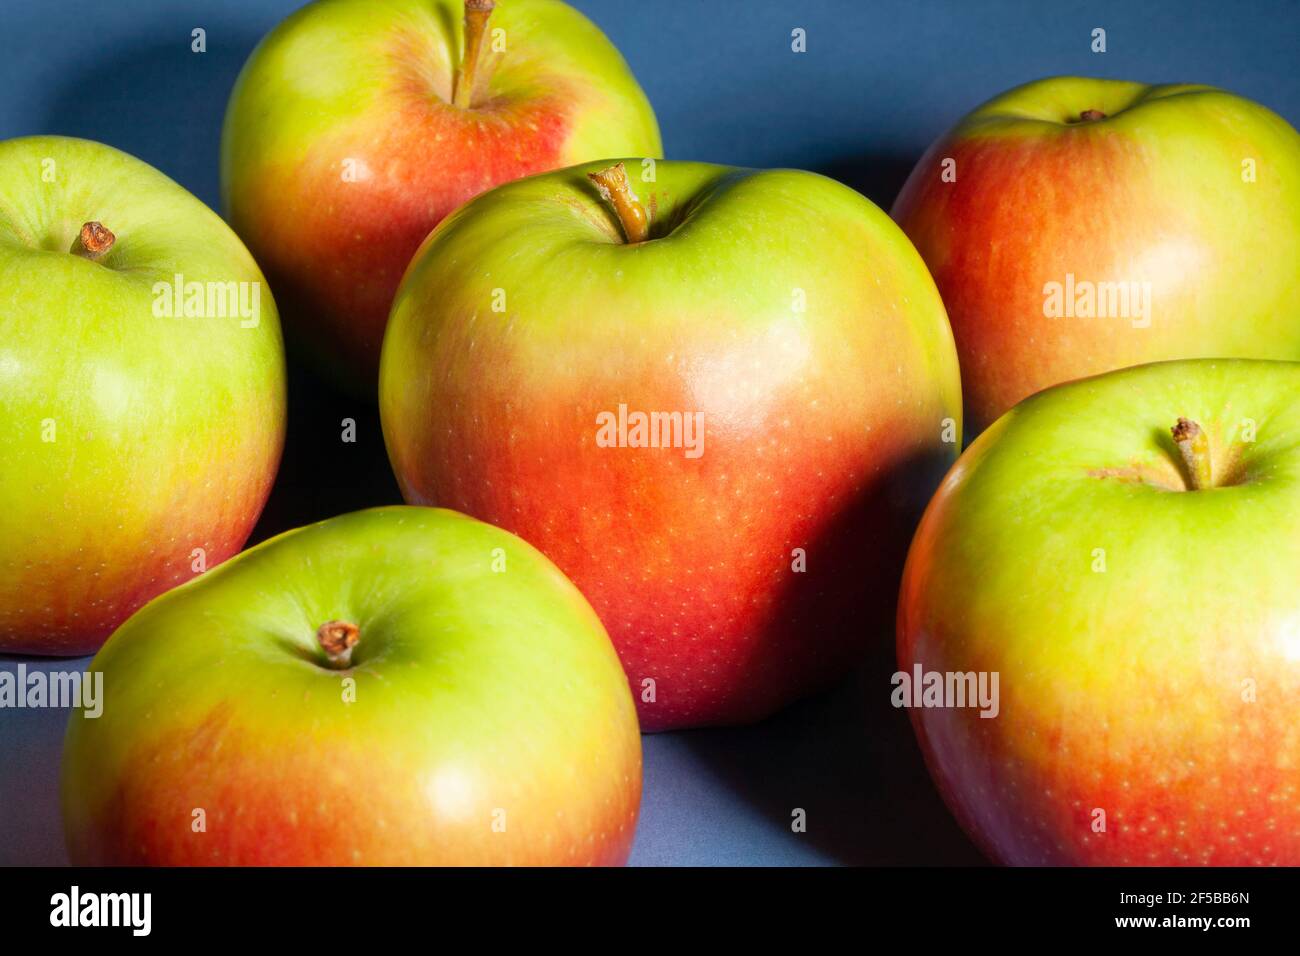 red green apple on blue background Stock Photo